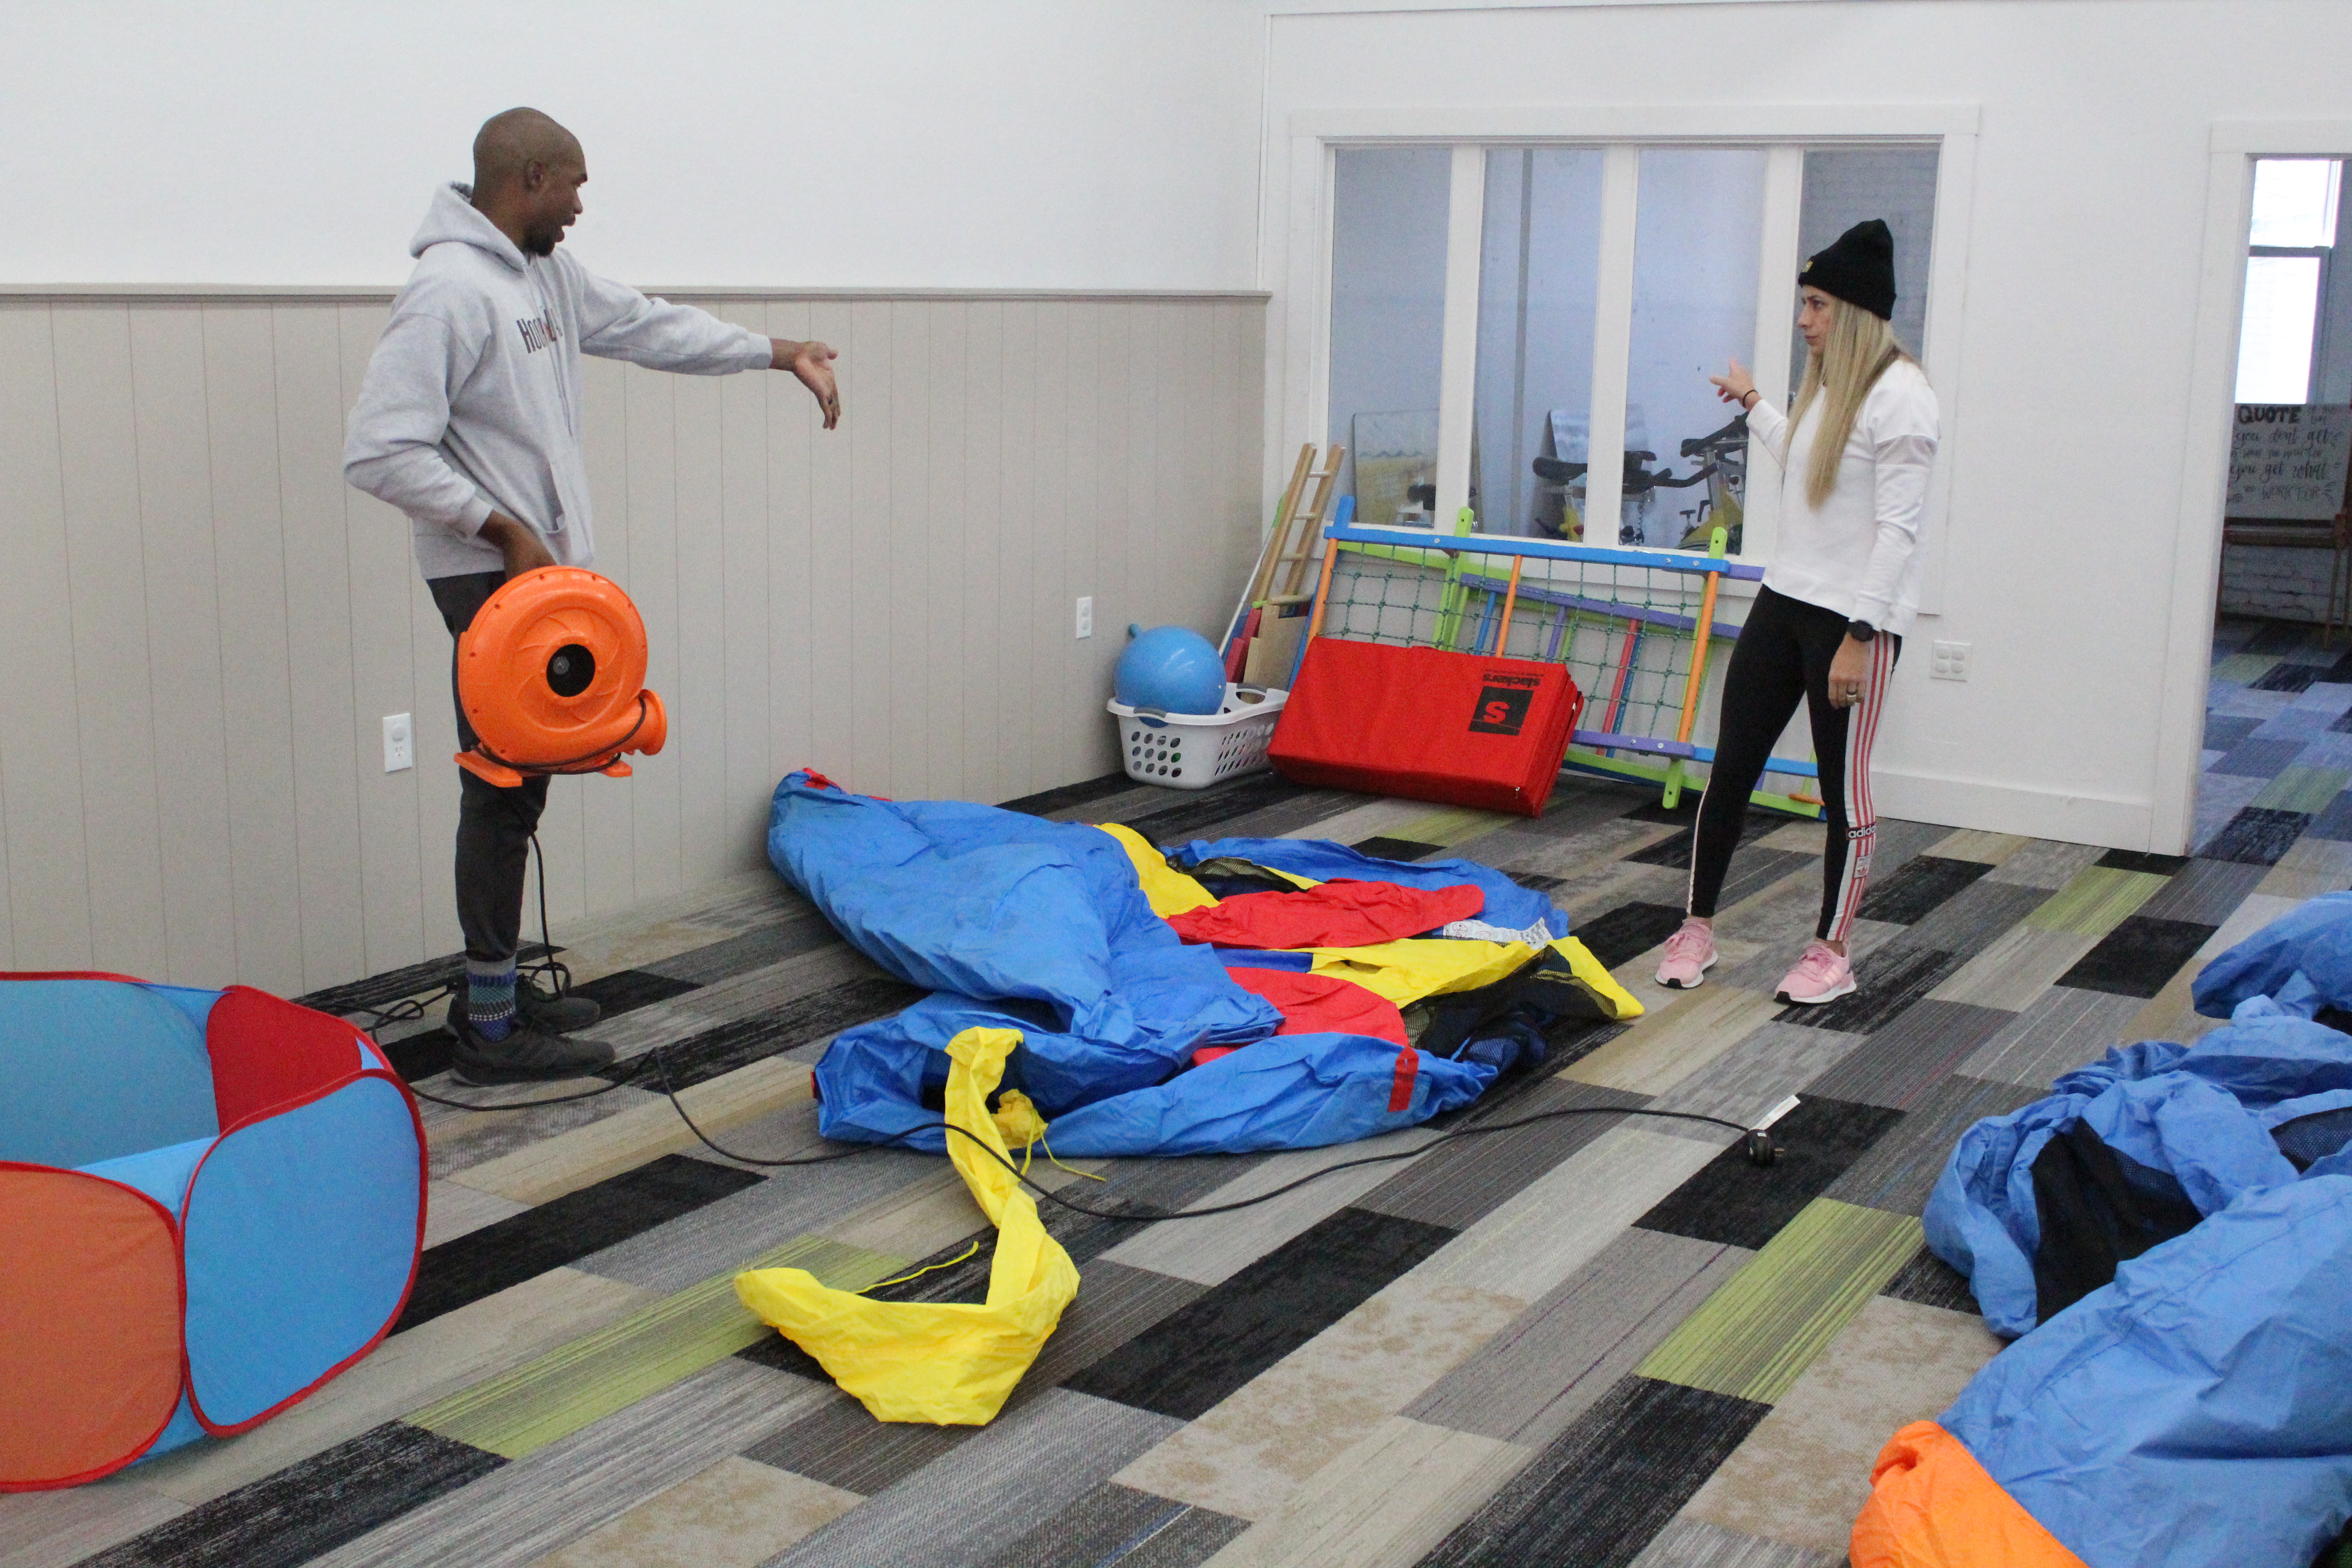 John Williams and his wife, Whitney, arrange inflatable bouncy houses inside their new business, Wren and Wrae’s Clubhouse, at 218 Oak Ave. in Spruce Pine.  The clubhouse offers inflatables, toys and other options for children while Whitney, a personal trainer, will use part of the building to host a variety of exercise classes for adults. Wren and Wrae’s will also be available to host birthday parties and other events. (Brandon Roberts/MNJ)